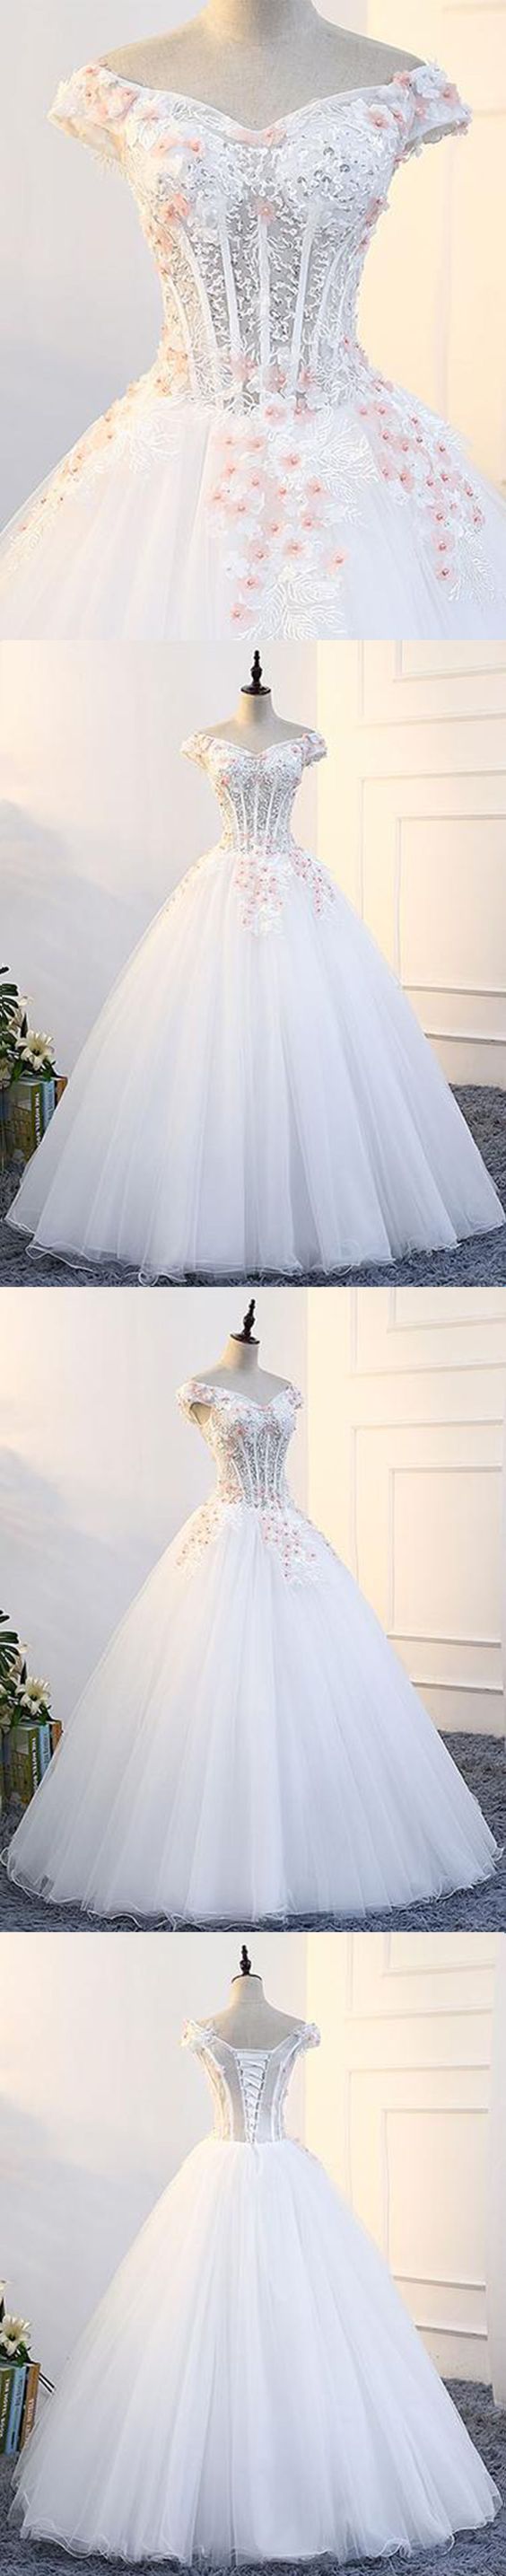 2018 Evening Gowns | White Tulle Off Shoulder Prom Gown Wedding Dress With Cap Sleeves M4655